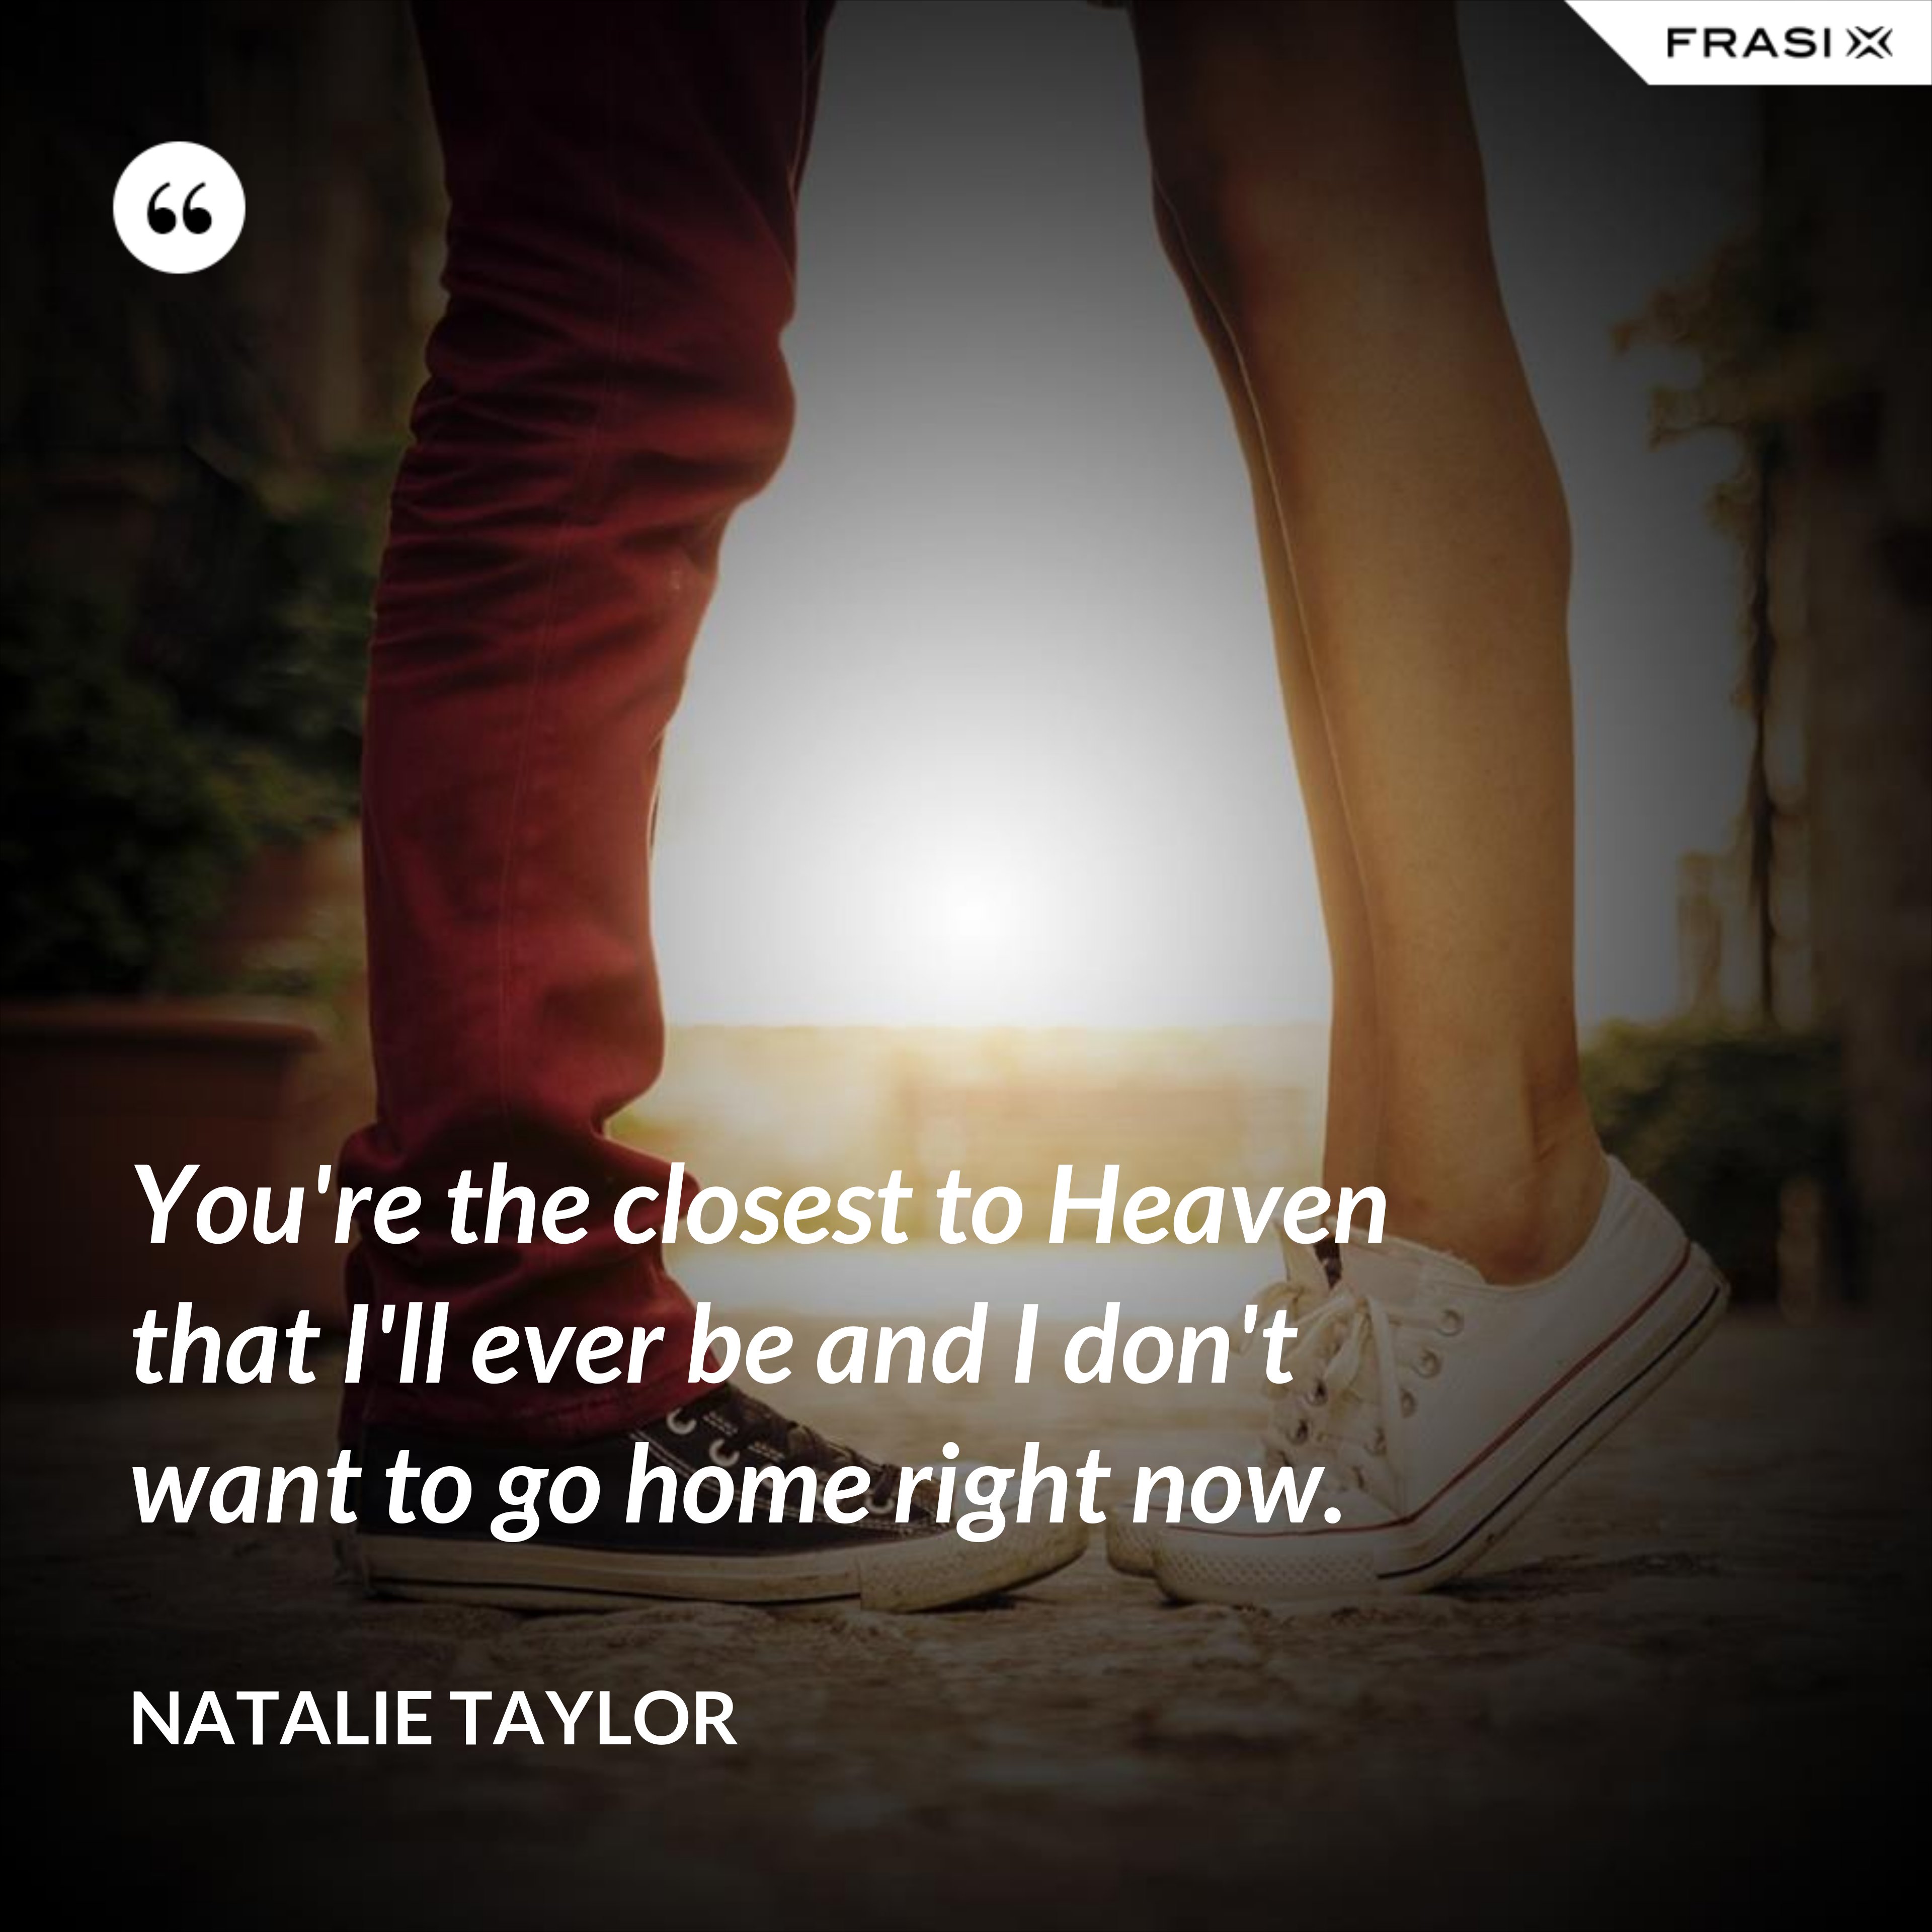 You're the closest to Heaven that I'll ever be and I don't want to go home right now. - Natalie Taylor